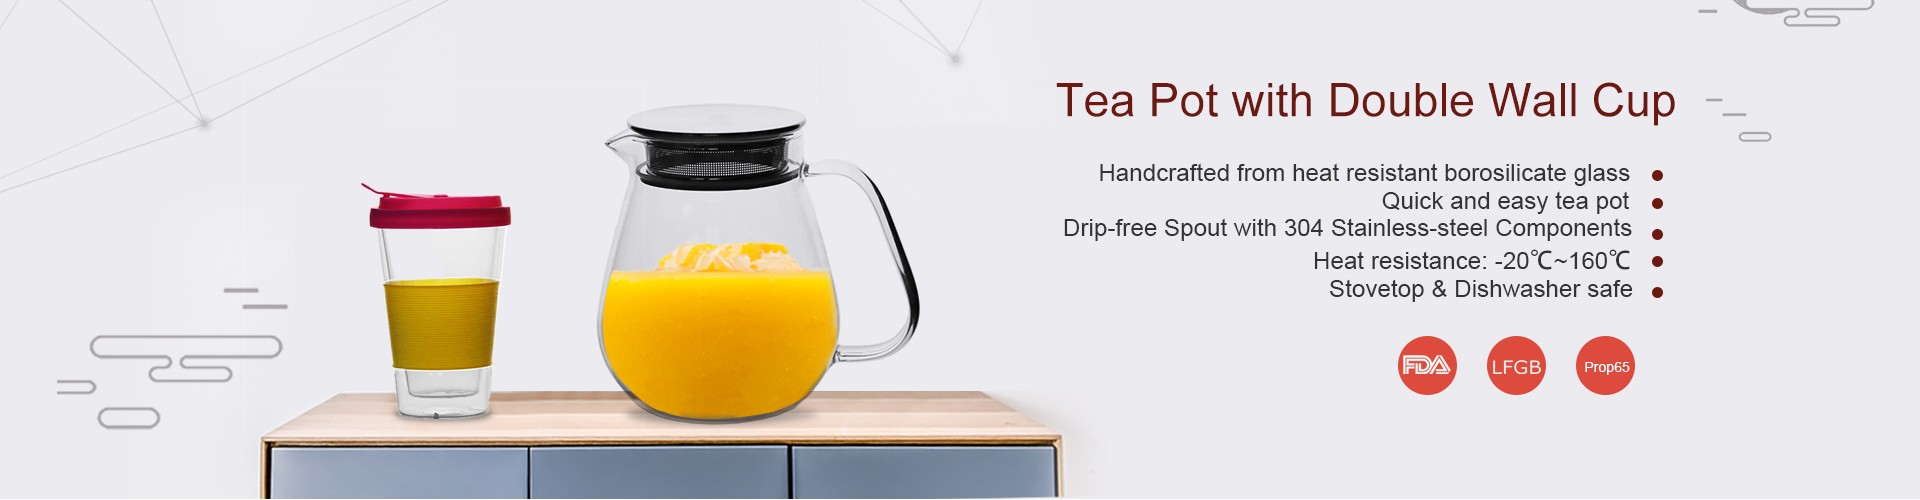 borosilicate glass teapot with double wall glass cups